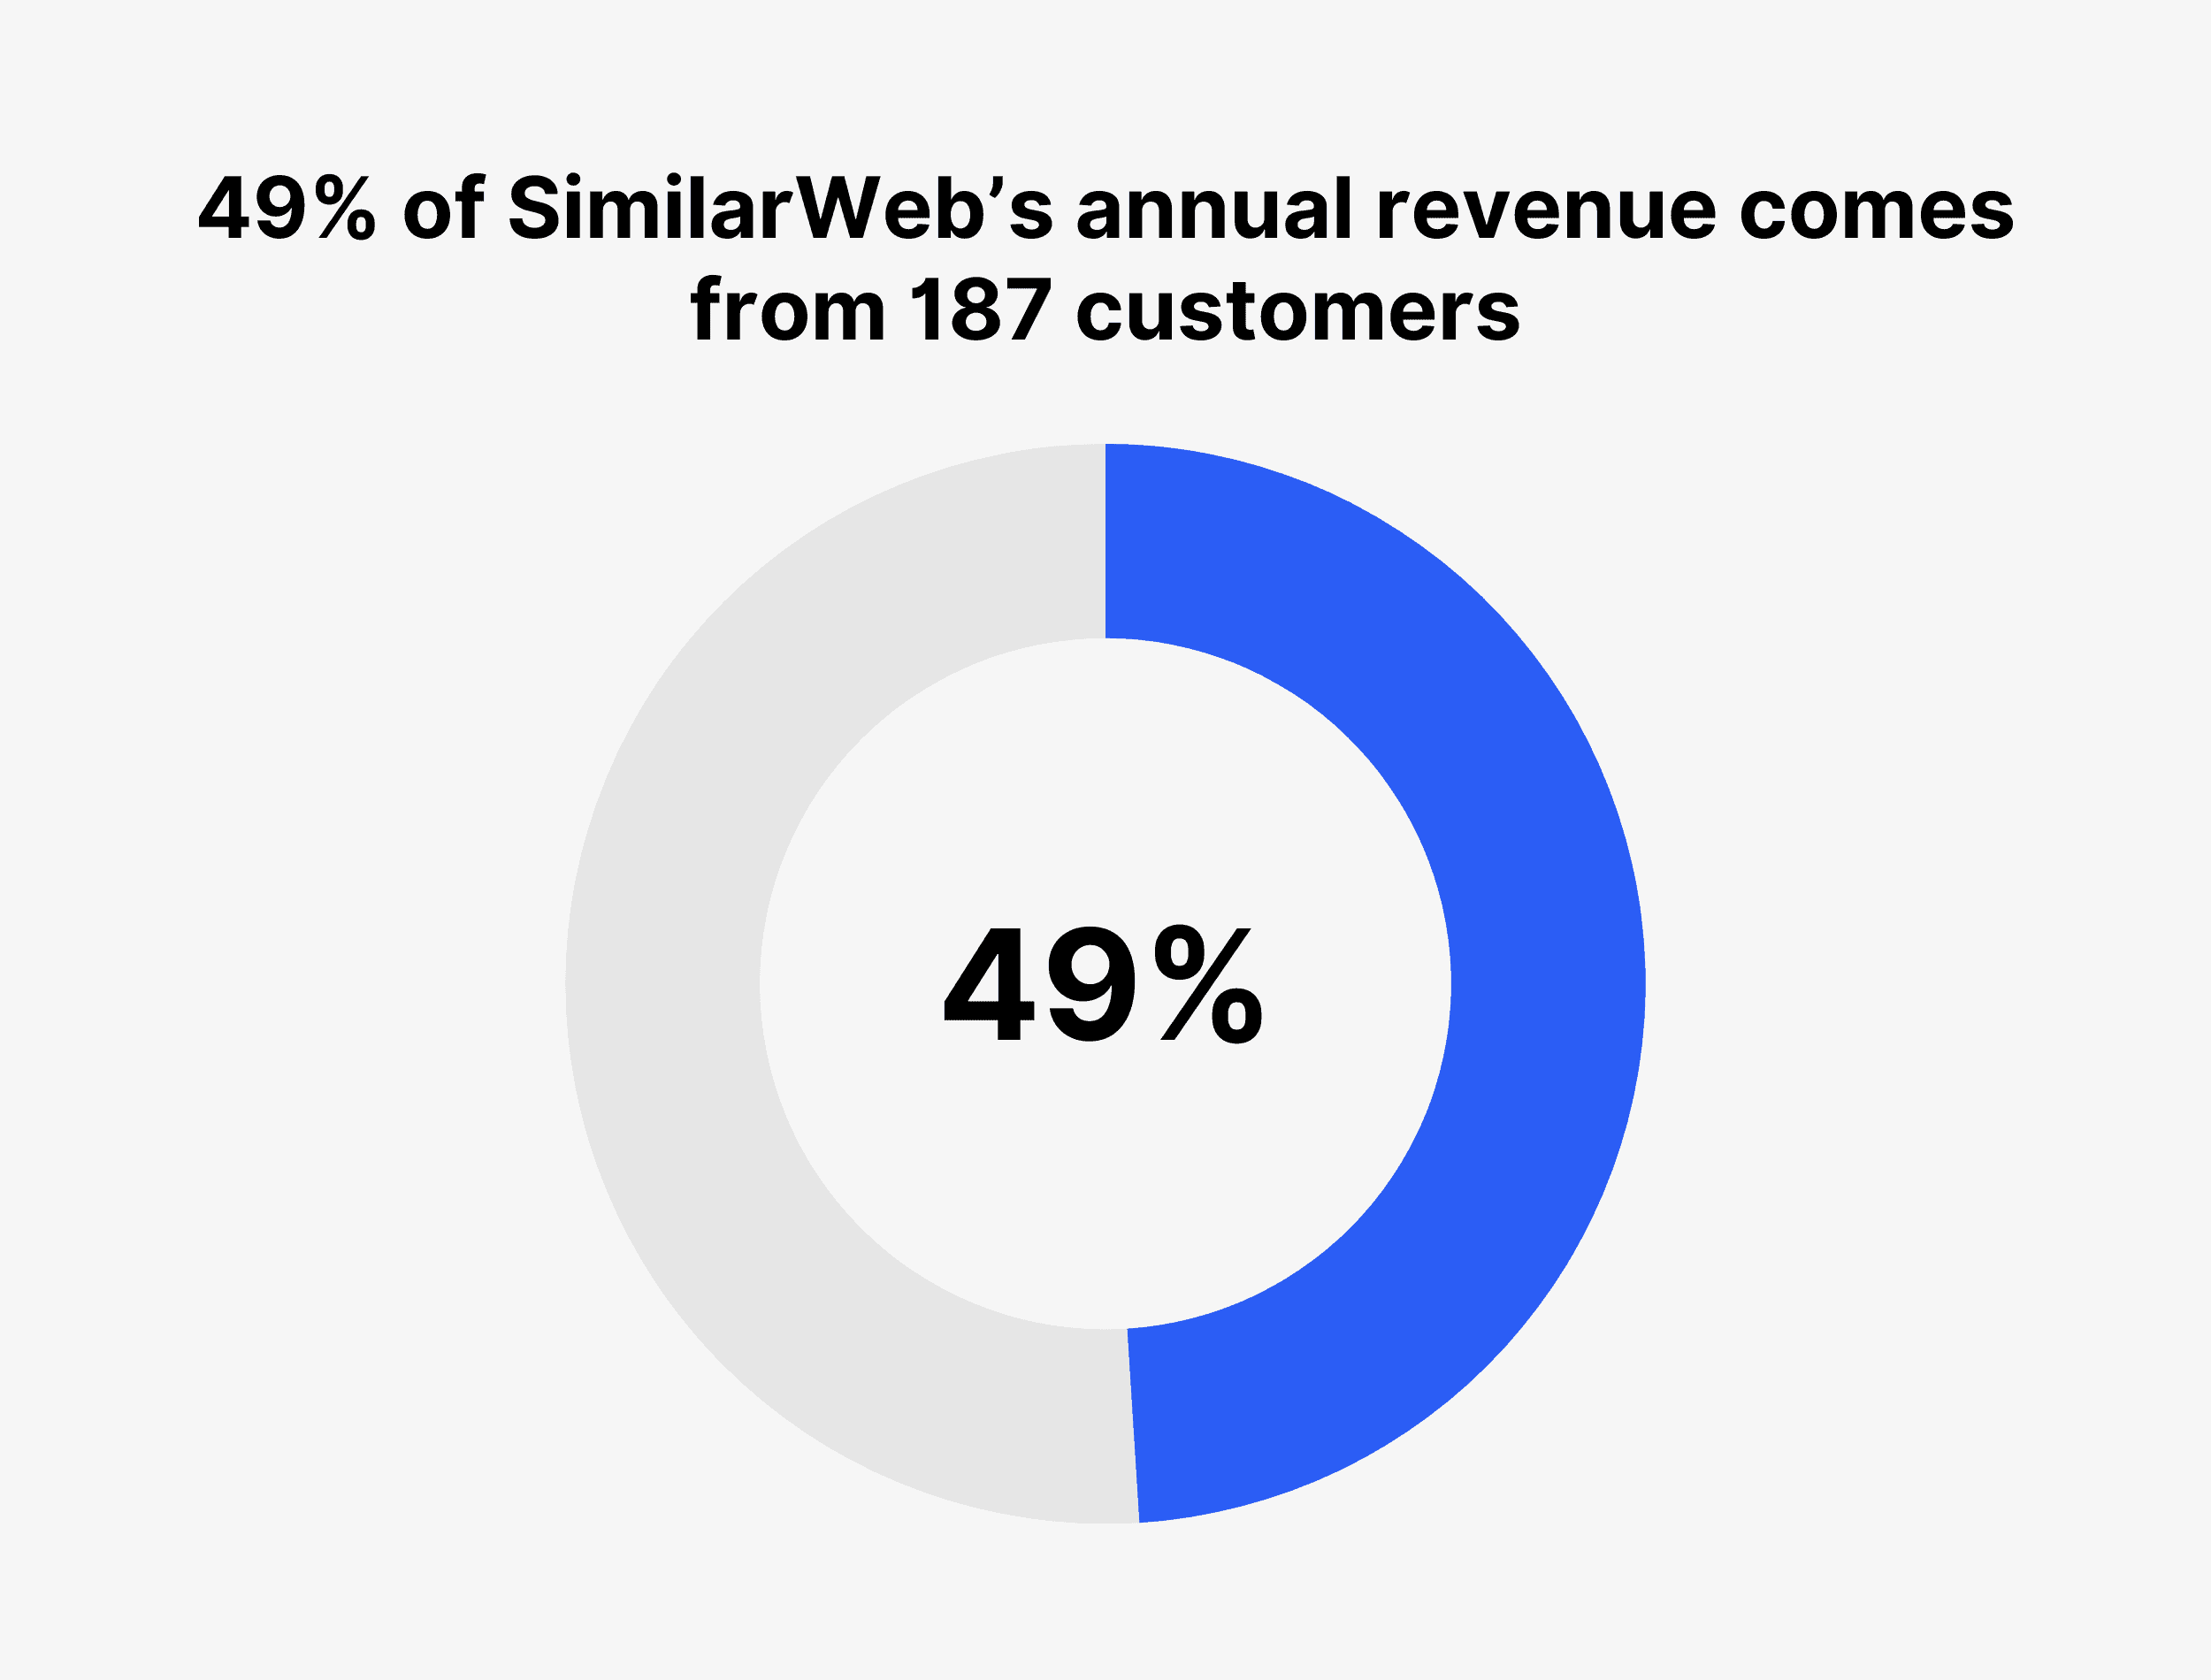 49% of SimilarWeb’s annual revenue comes from 187 customers